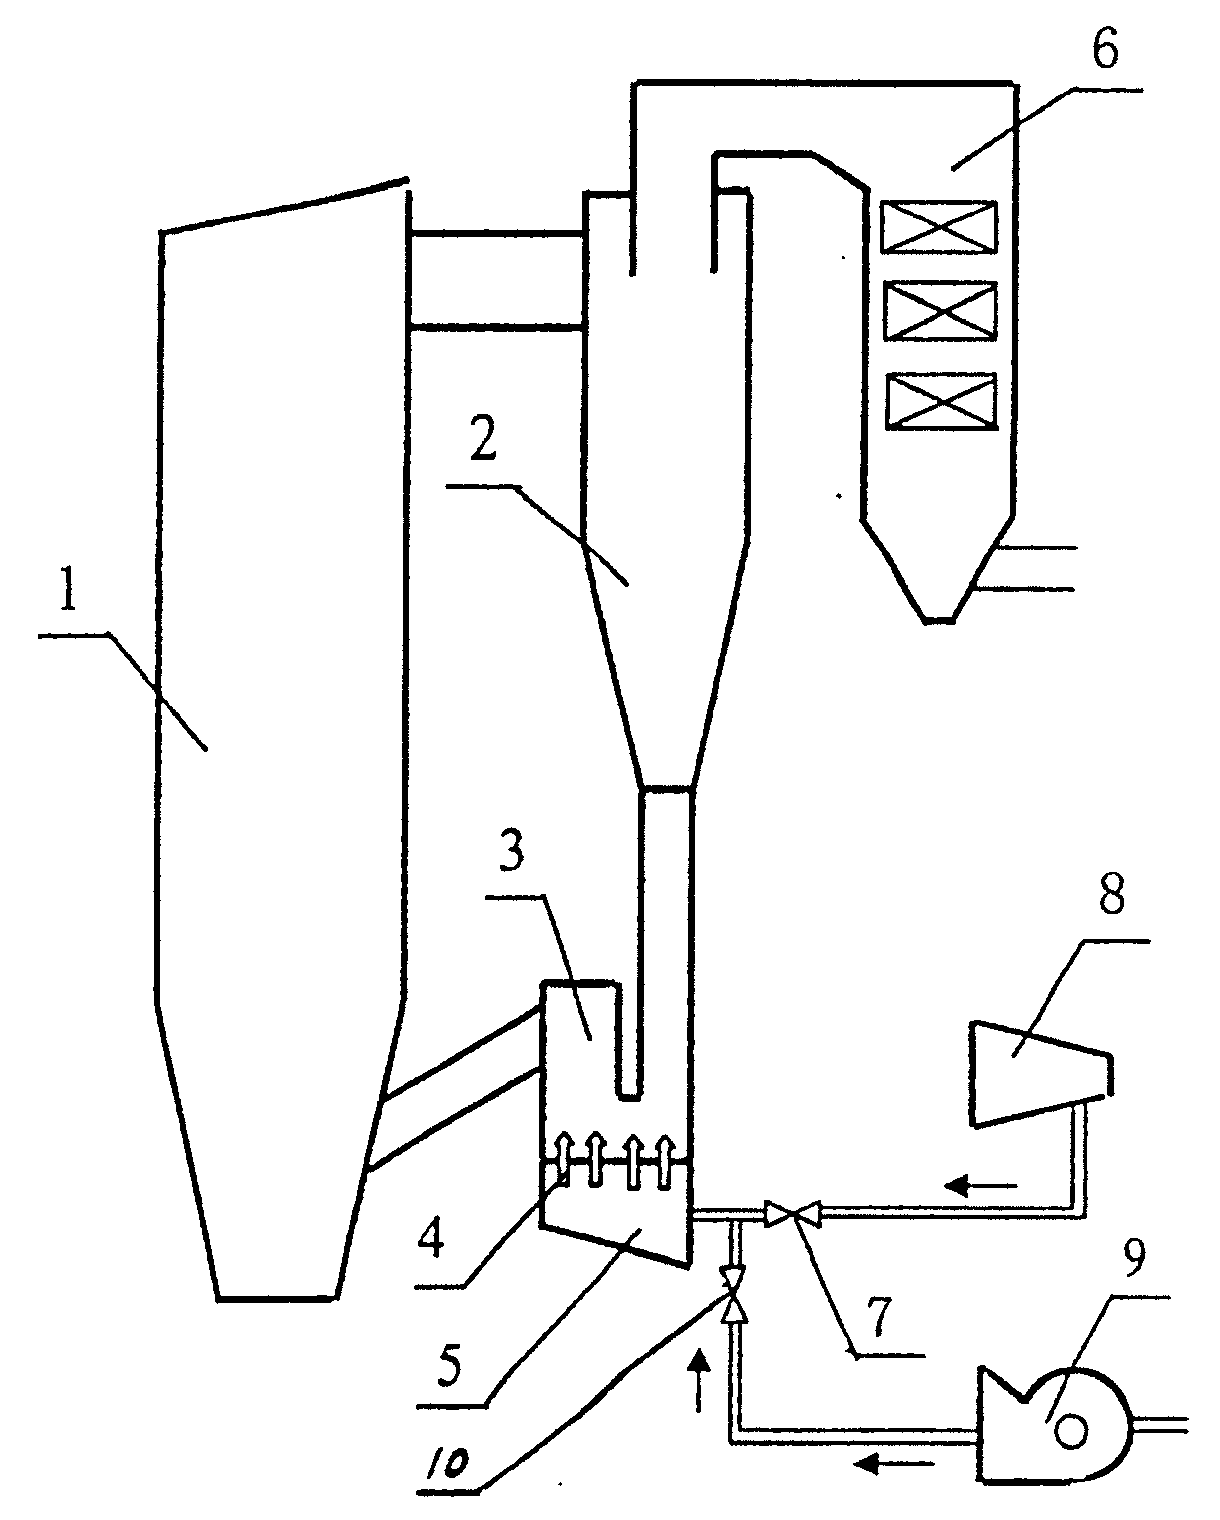 Method of fluidizing wind at high pressure using steam to replace air